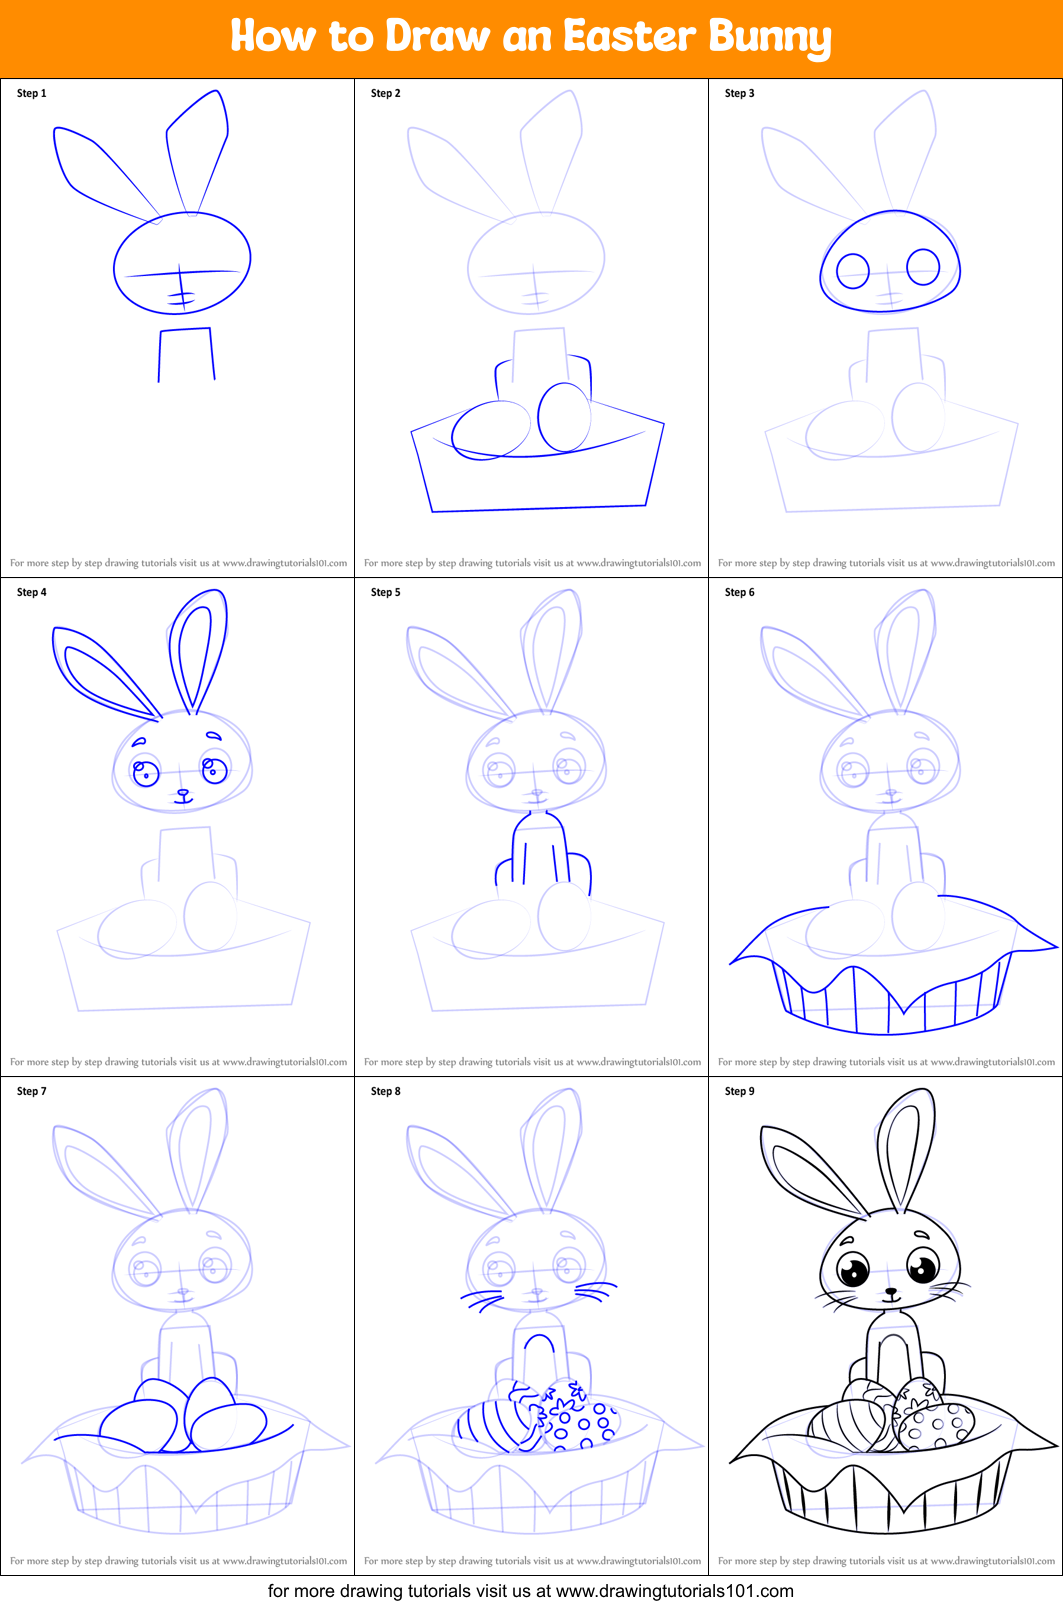 how to draw an Easter bunny step by step